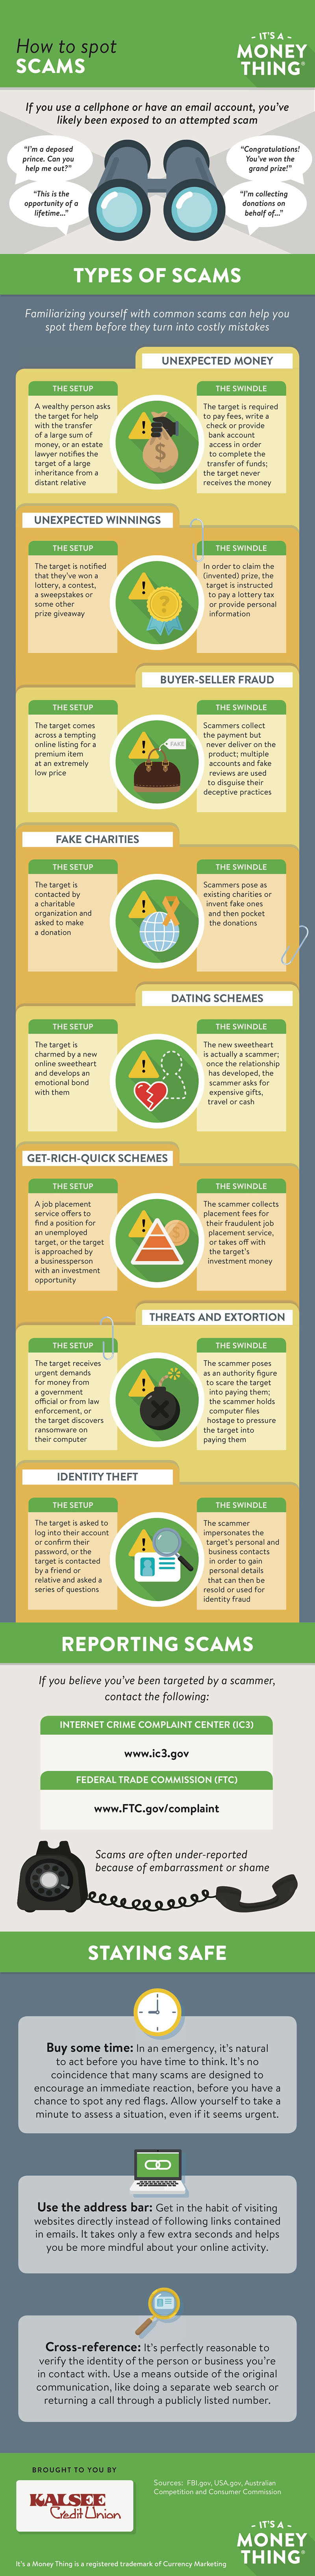 how to spot a scam infographic, click for transcription